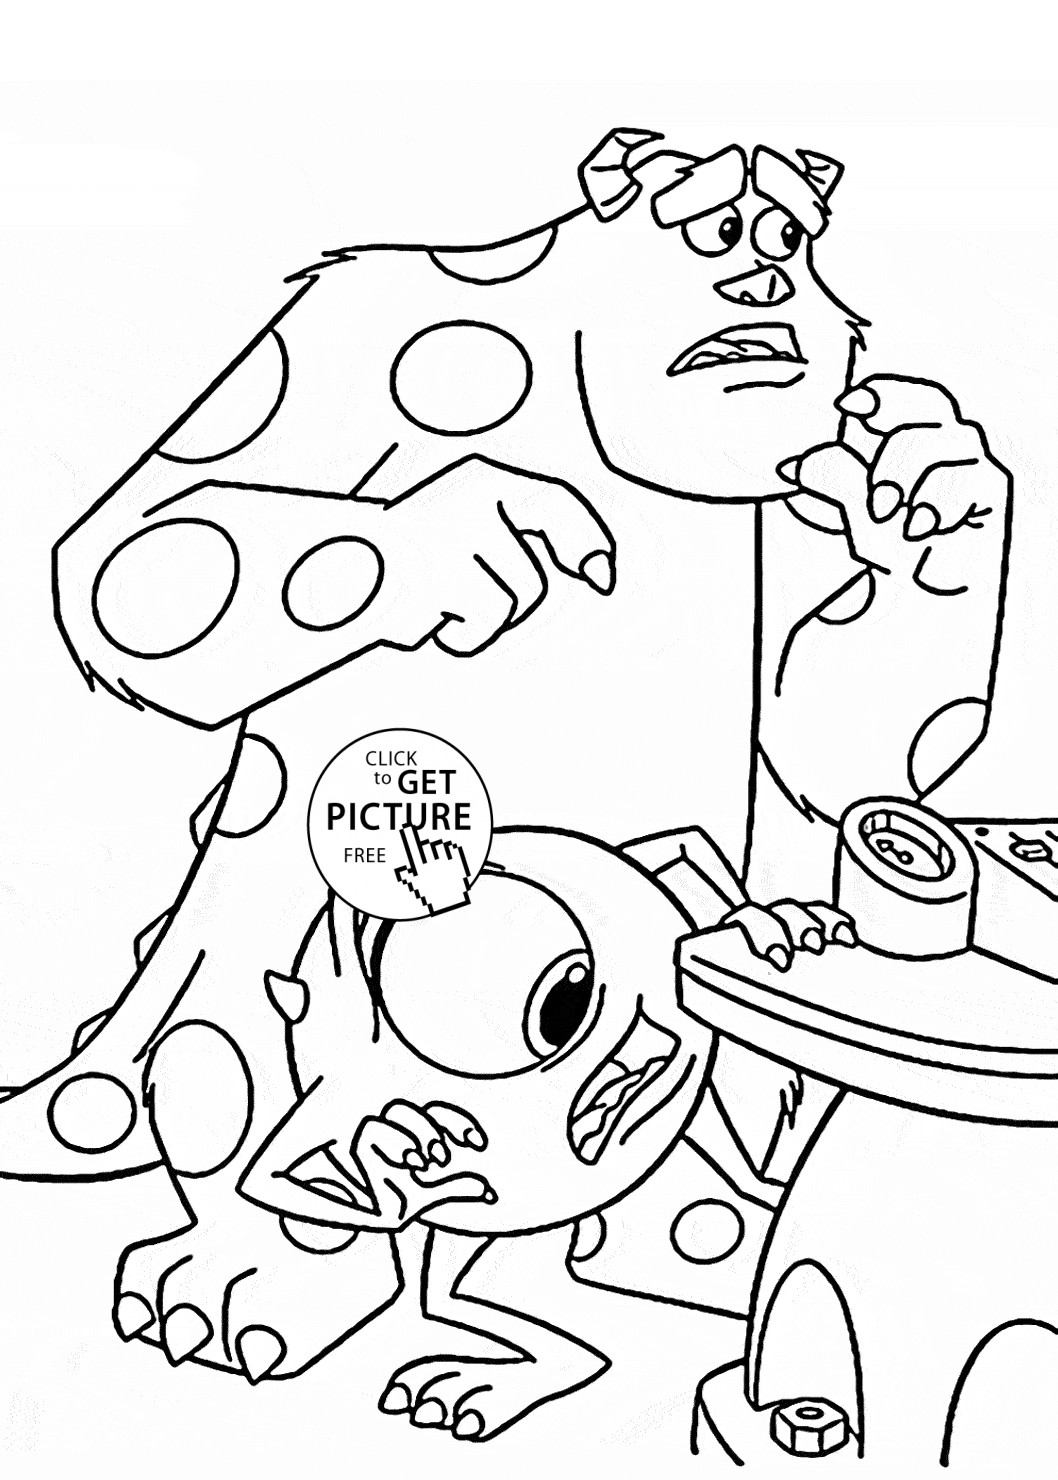 Coloring Sheets For Children
 Disney Coloring Pages For Toddlers Coloring Home